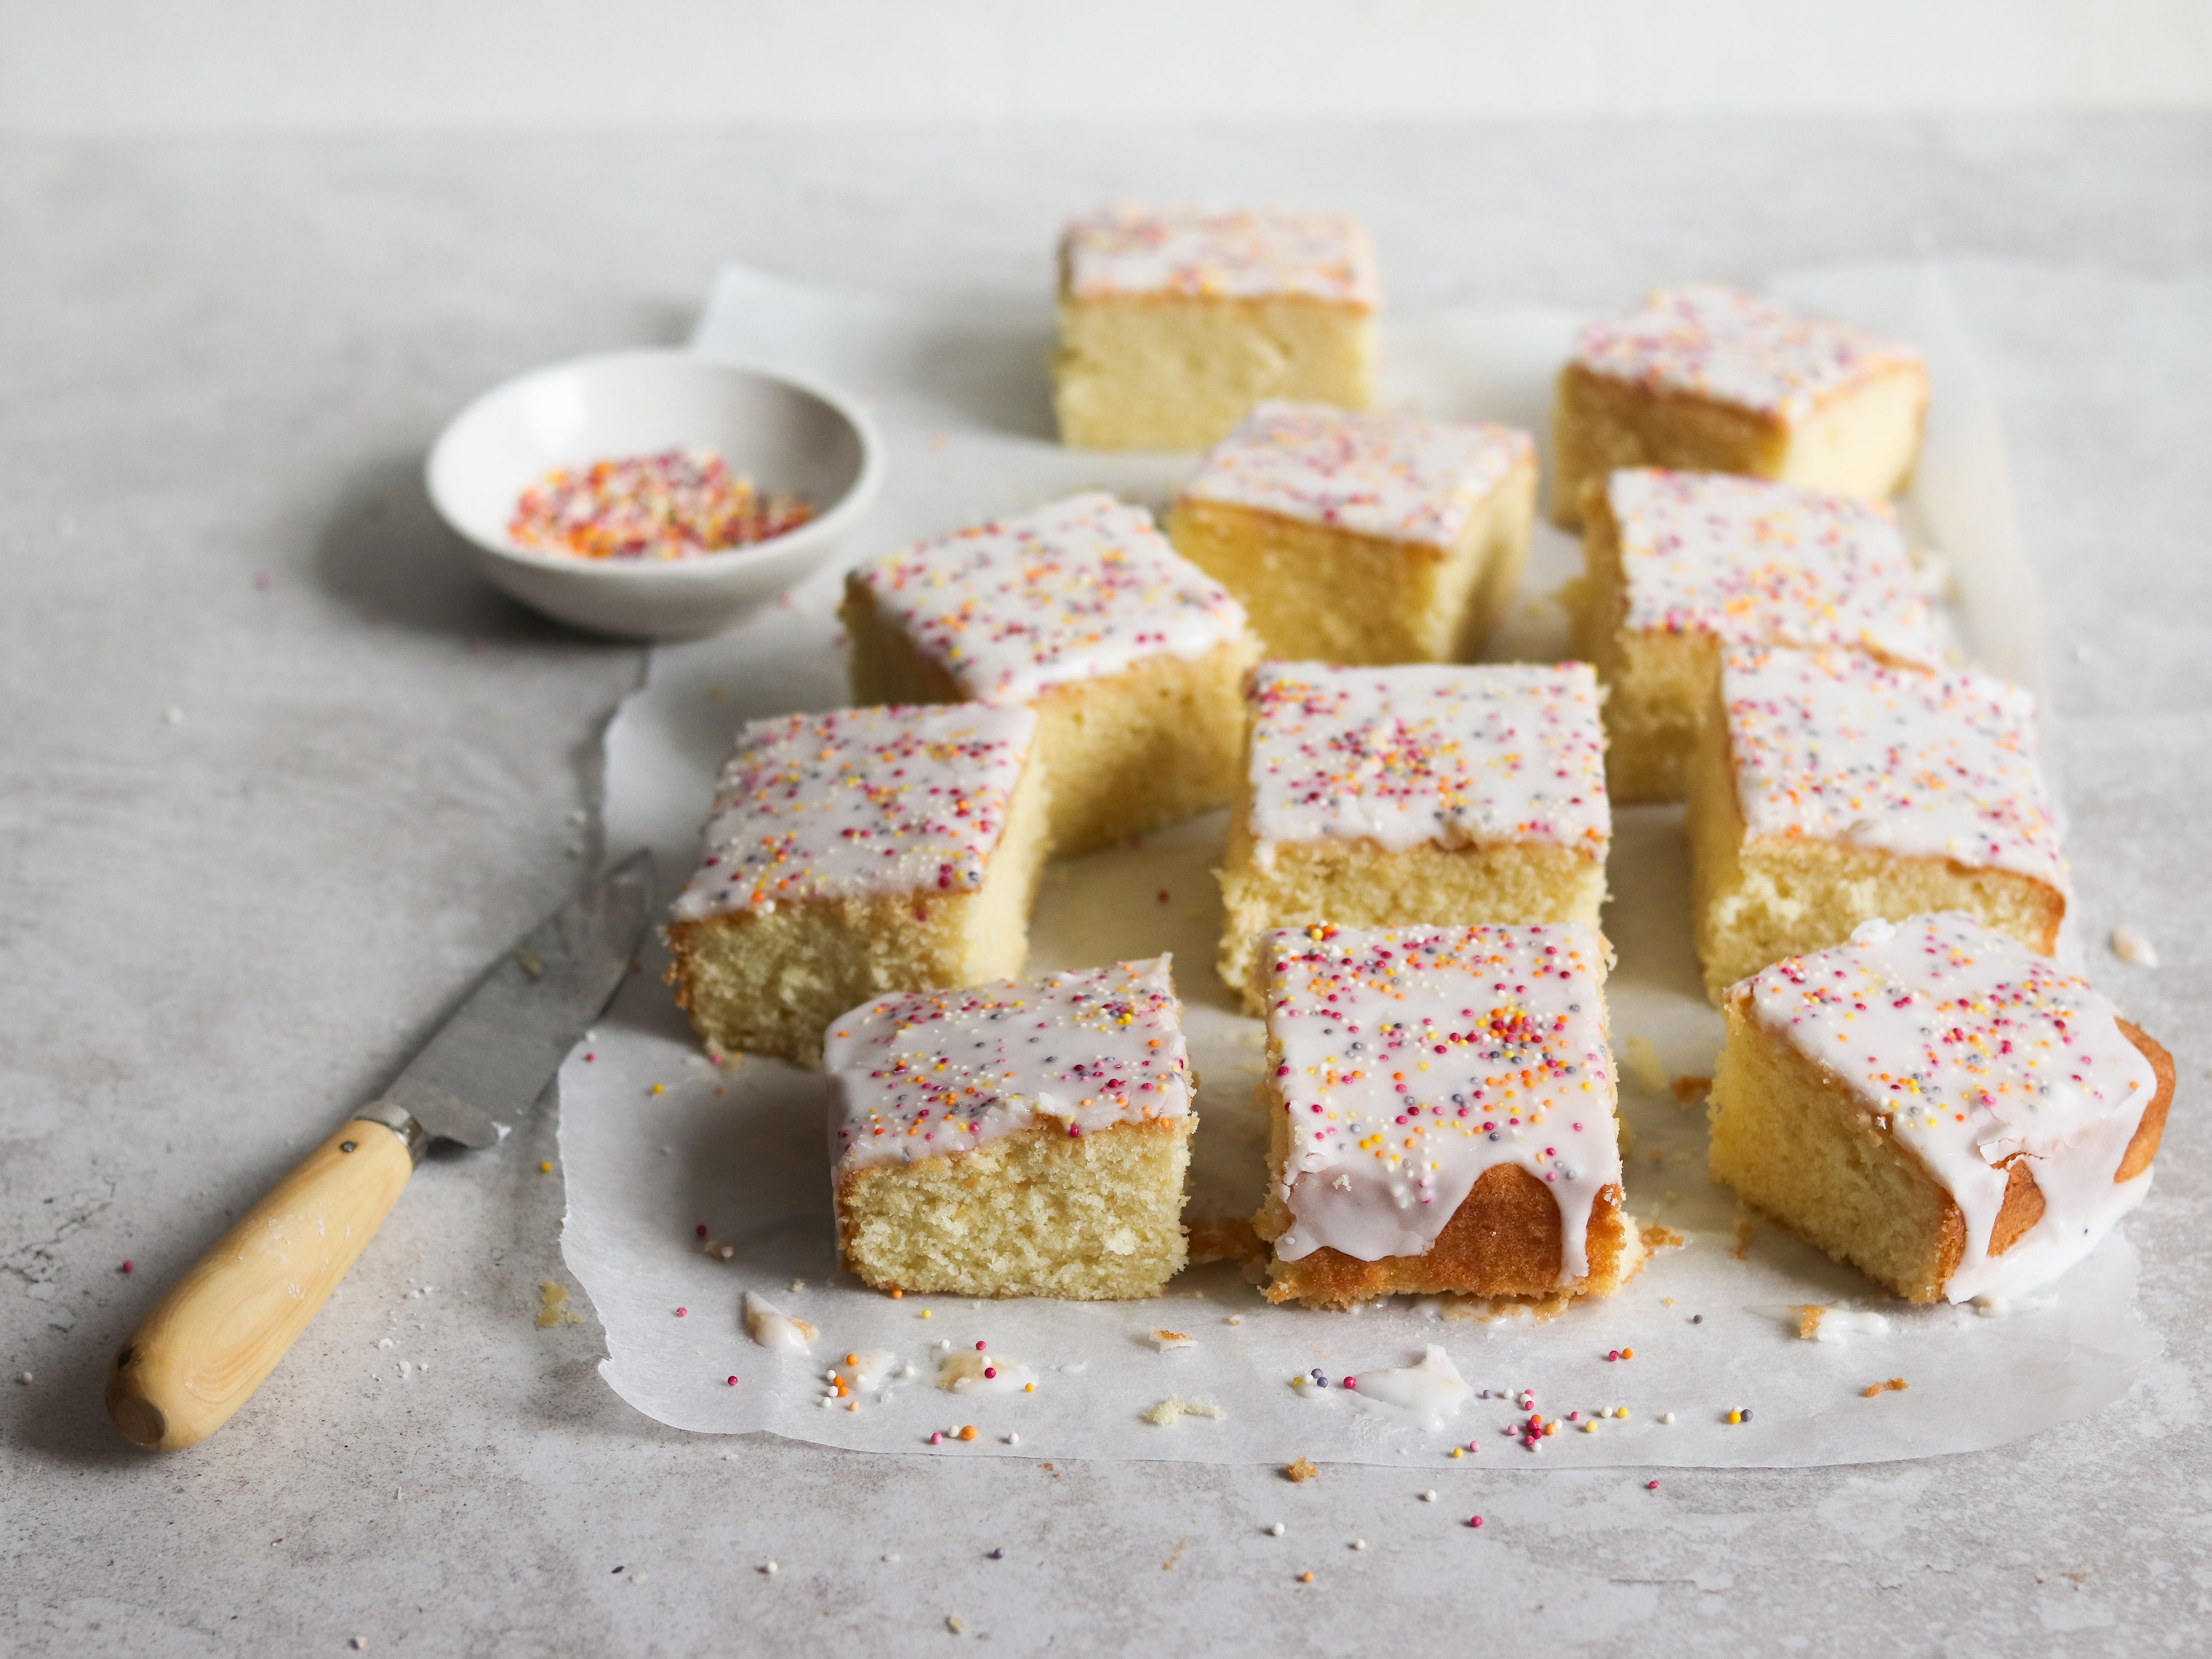 Sprinkle Cake slices with icing and sprinkles dripping down the cake. On a sheet of baking paper next to a knife and a bowl of sprinkles